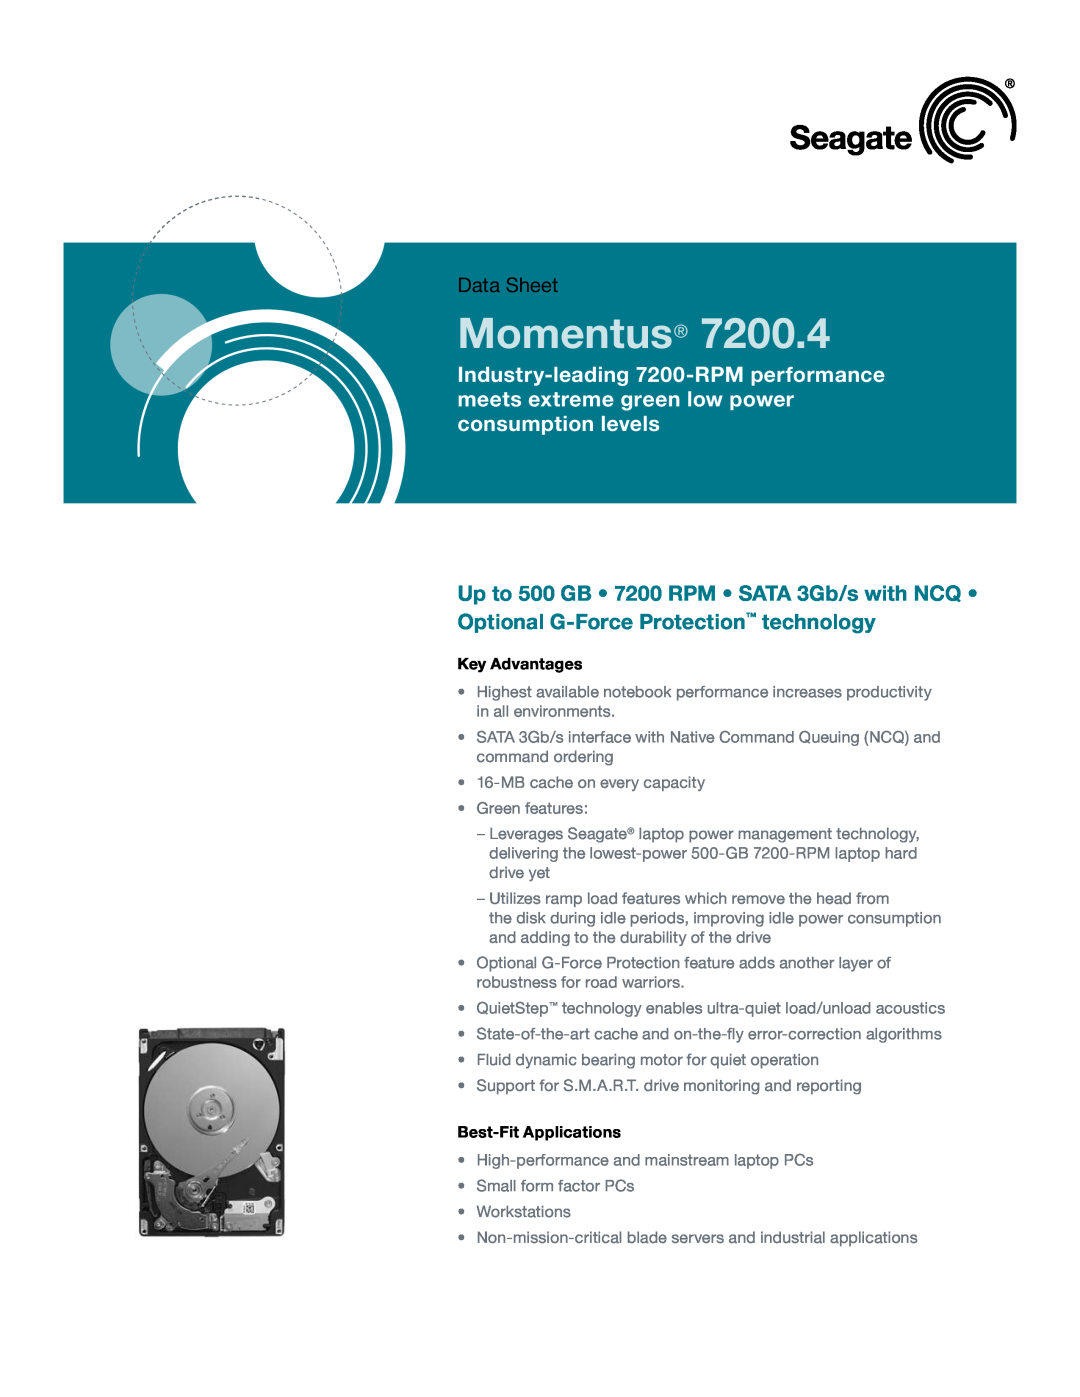 Seagate ST9640420AS manual Key Advantages, Best-Fit Applications, Momentus, Data Sheet 